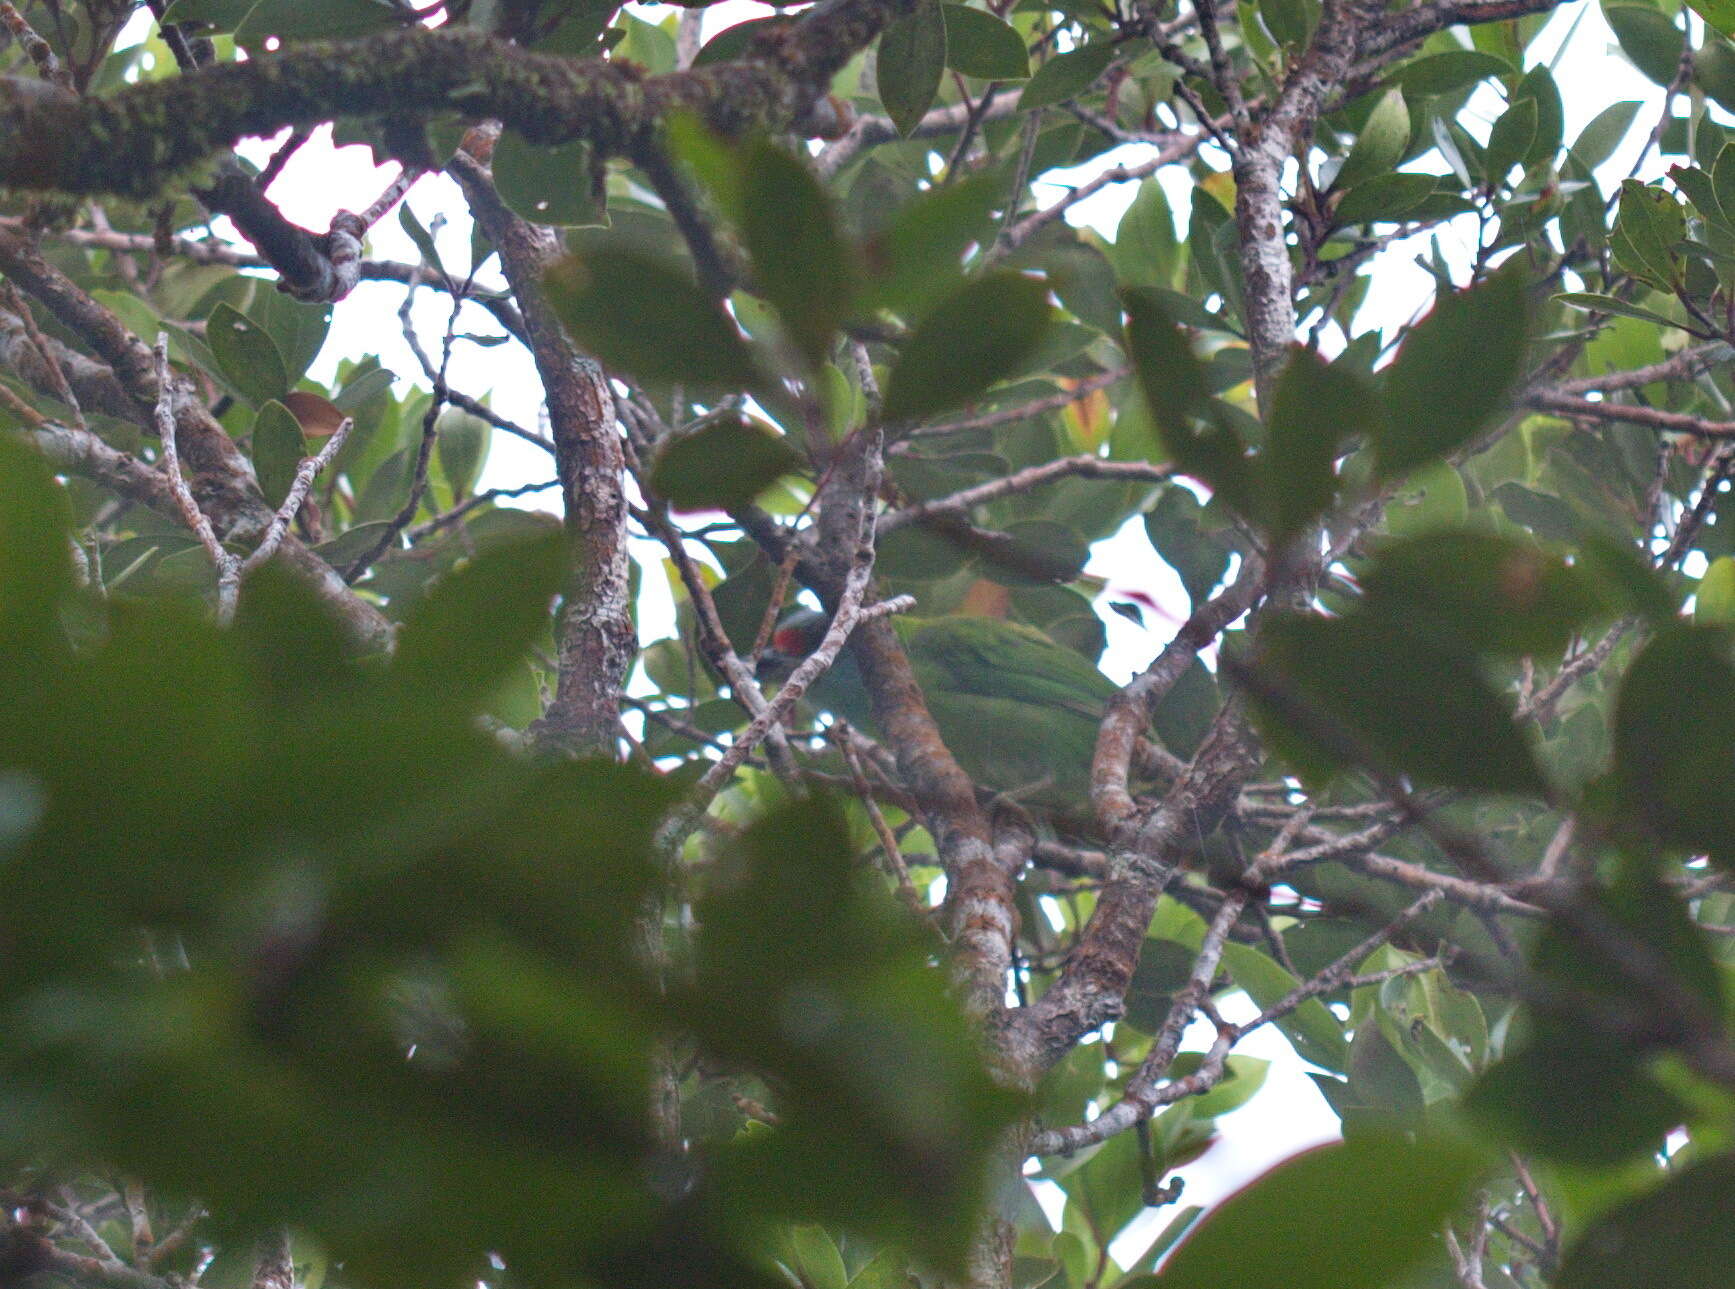 Image of Turquoise-throated Barbet